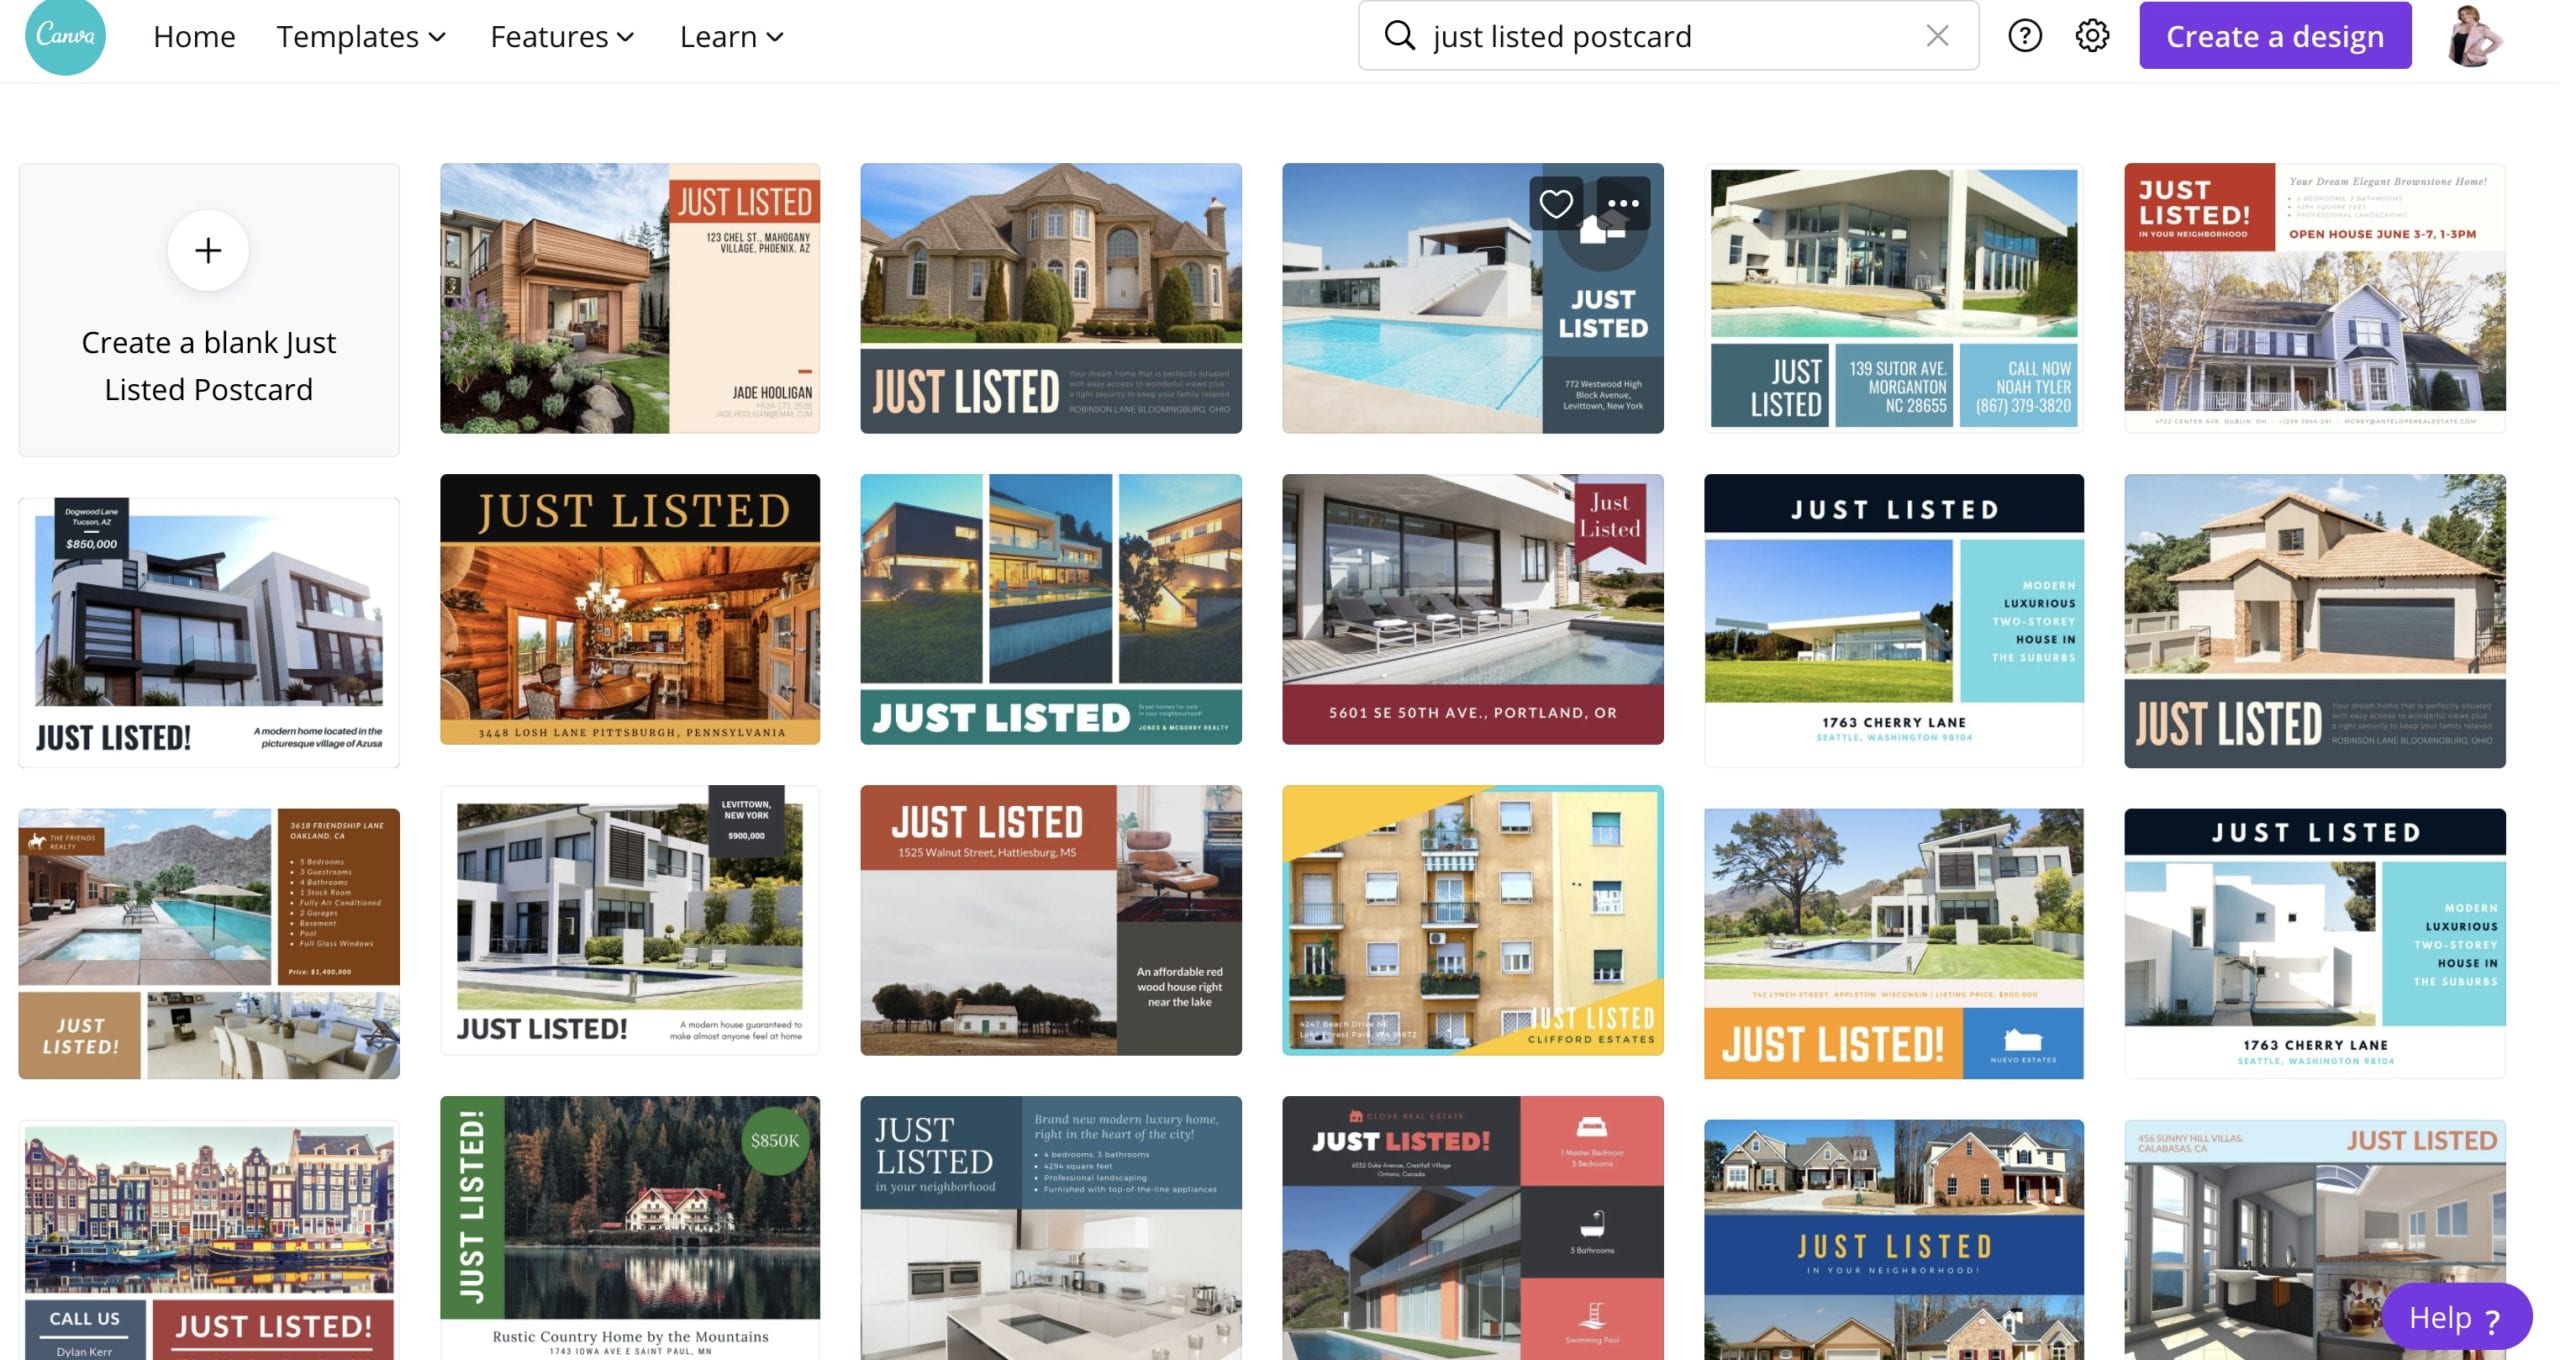 You can create Just listed postcards in Canva